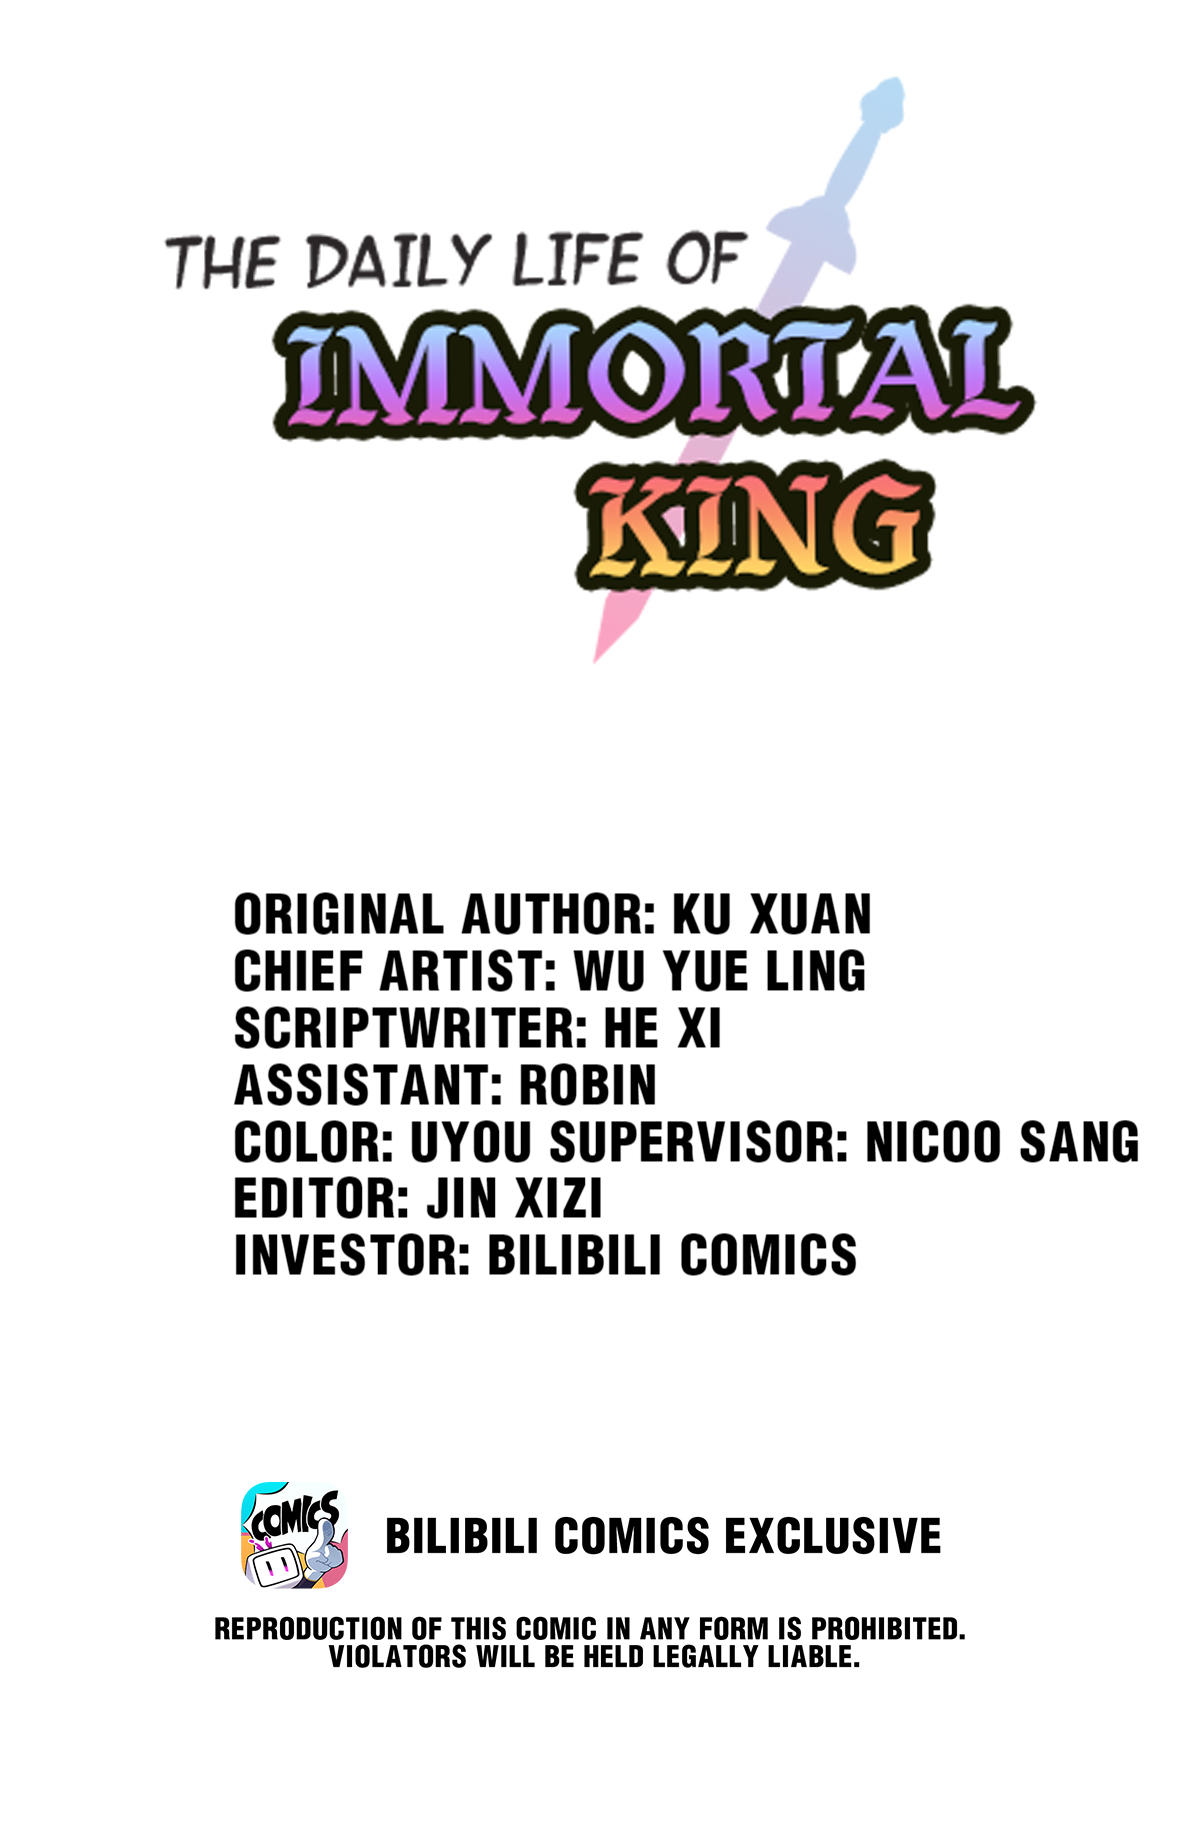 Read The Daily Life of the Immortal King online